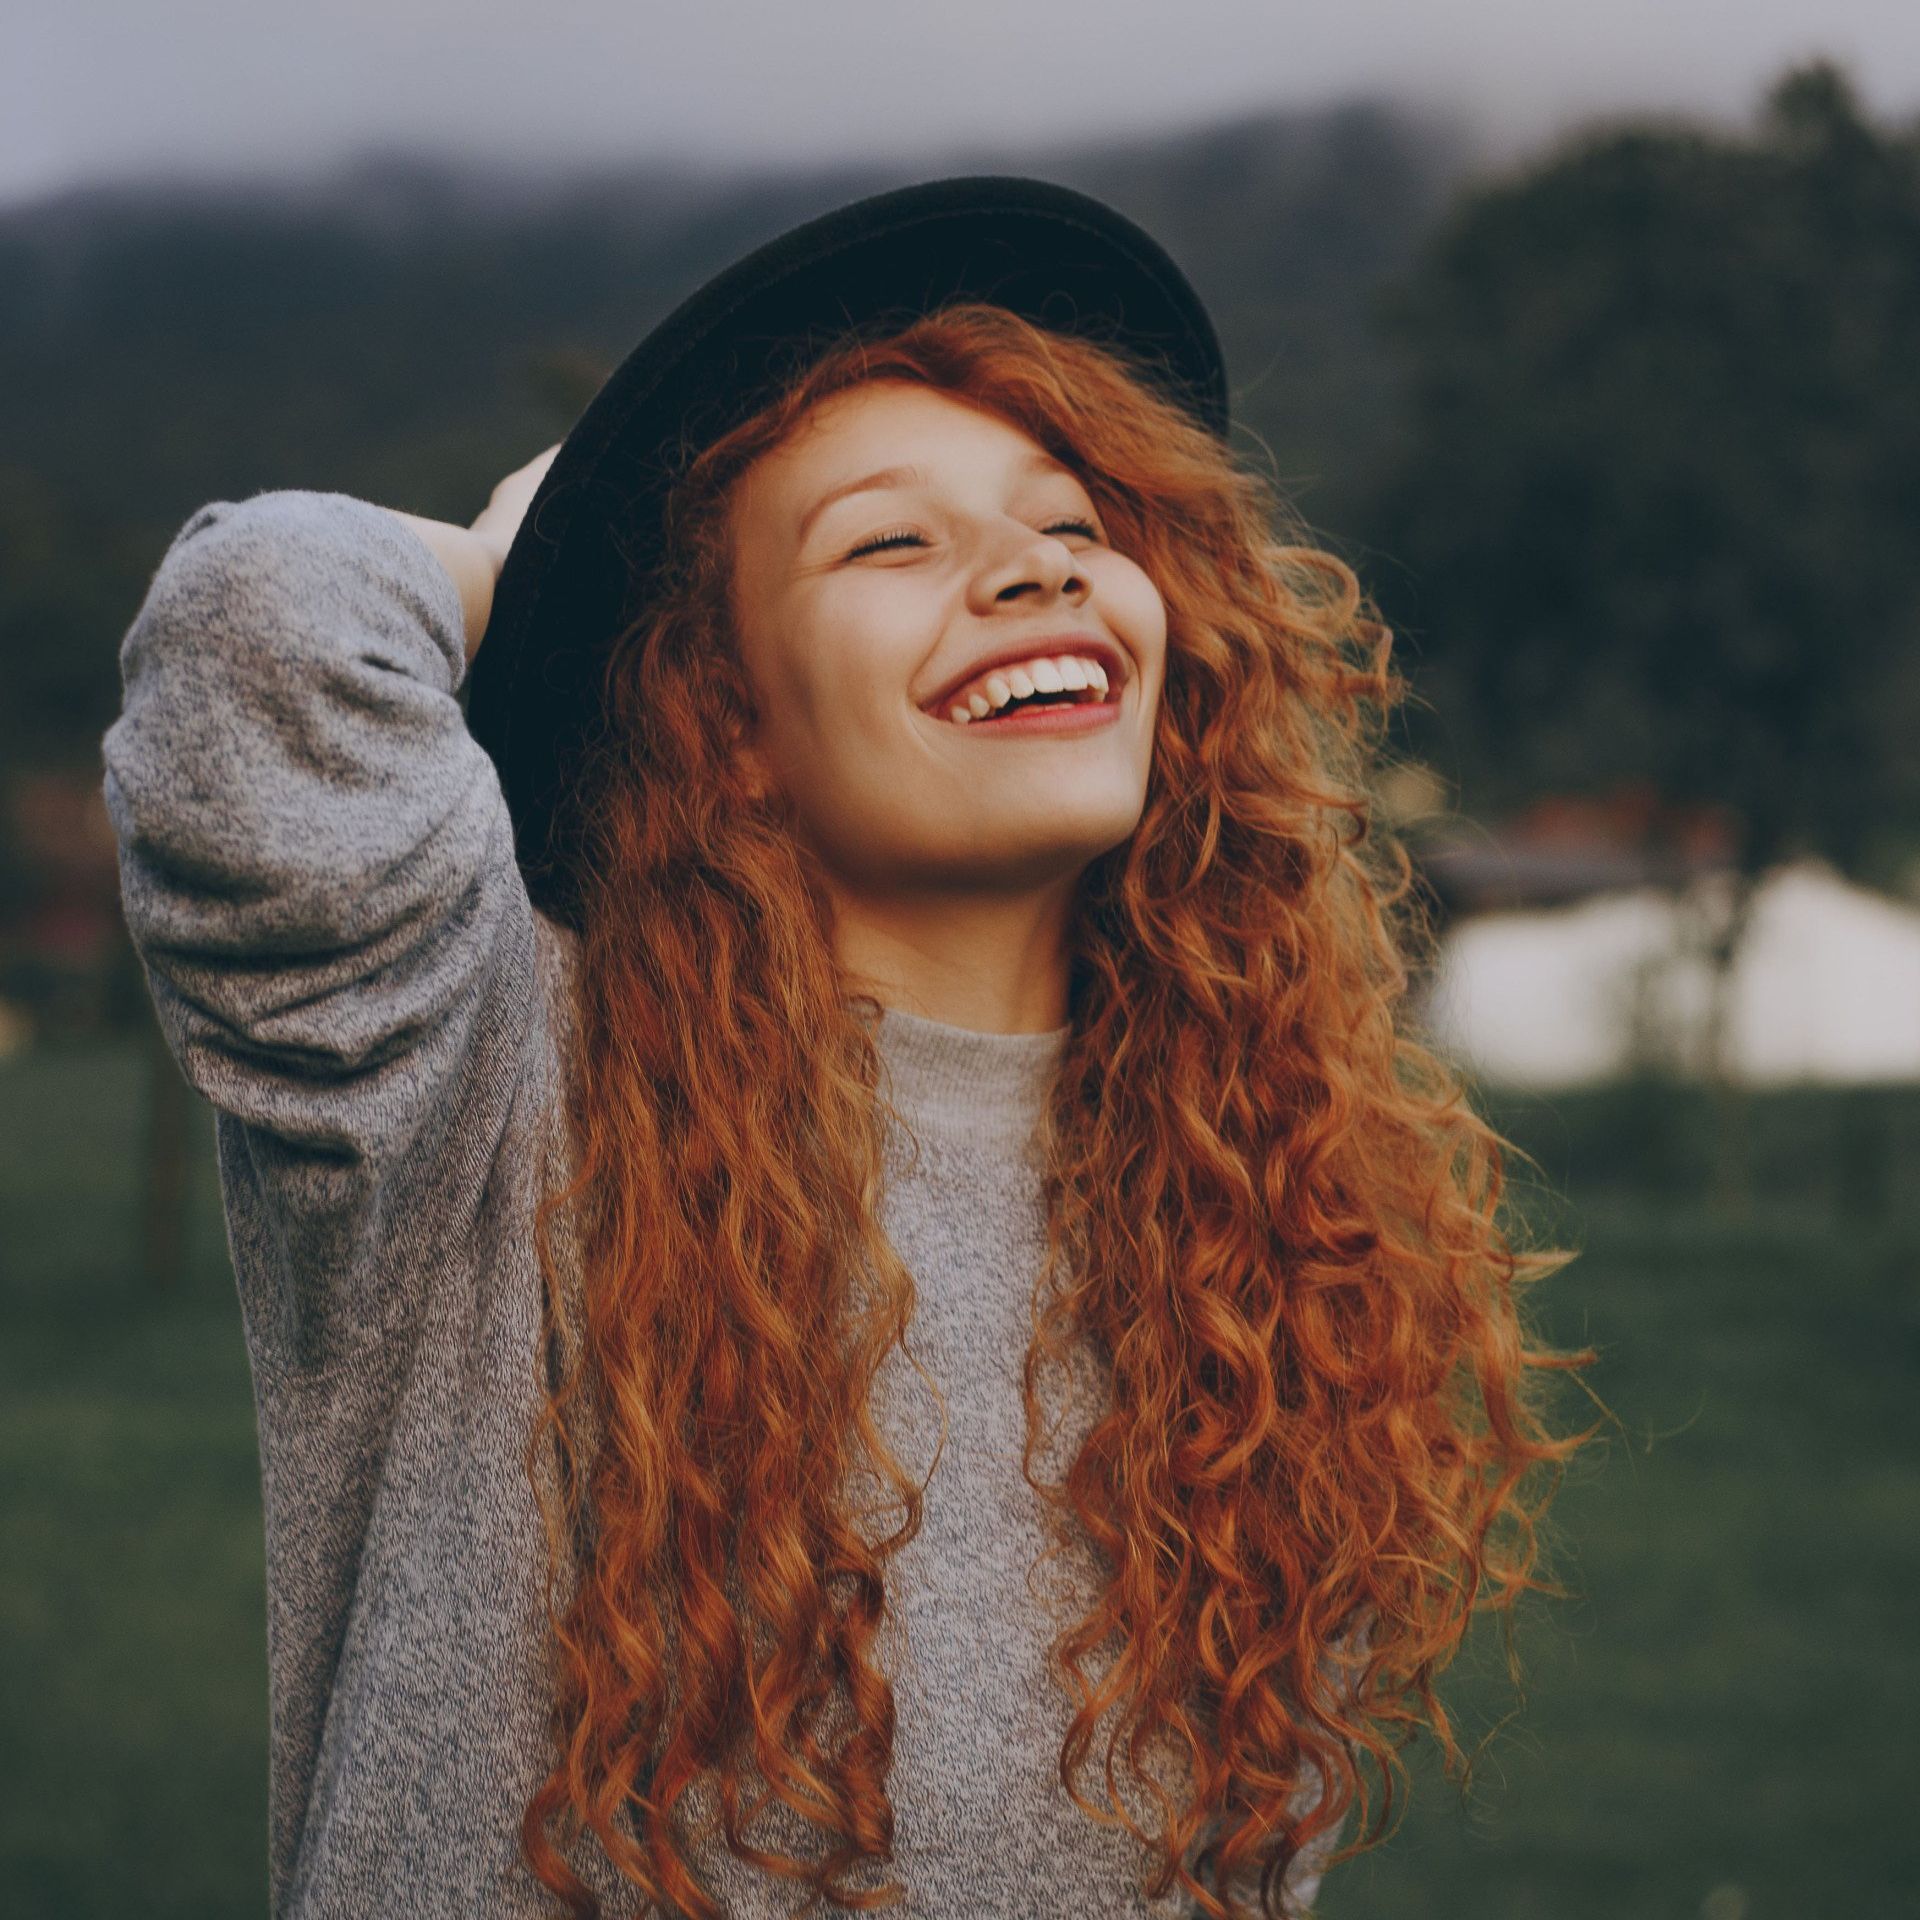 Redheaded woman with hat, smiling outside